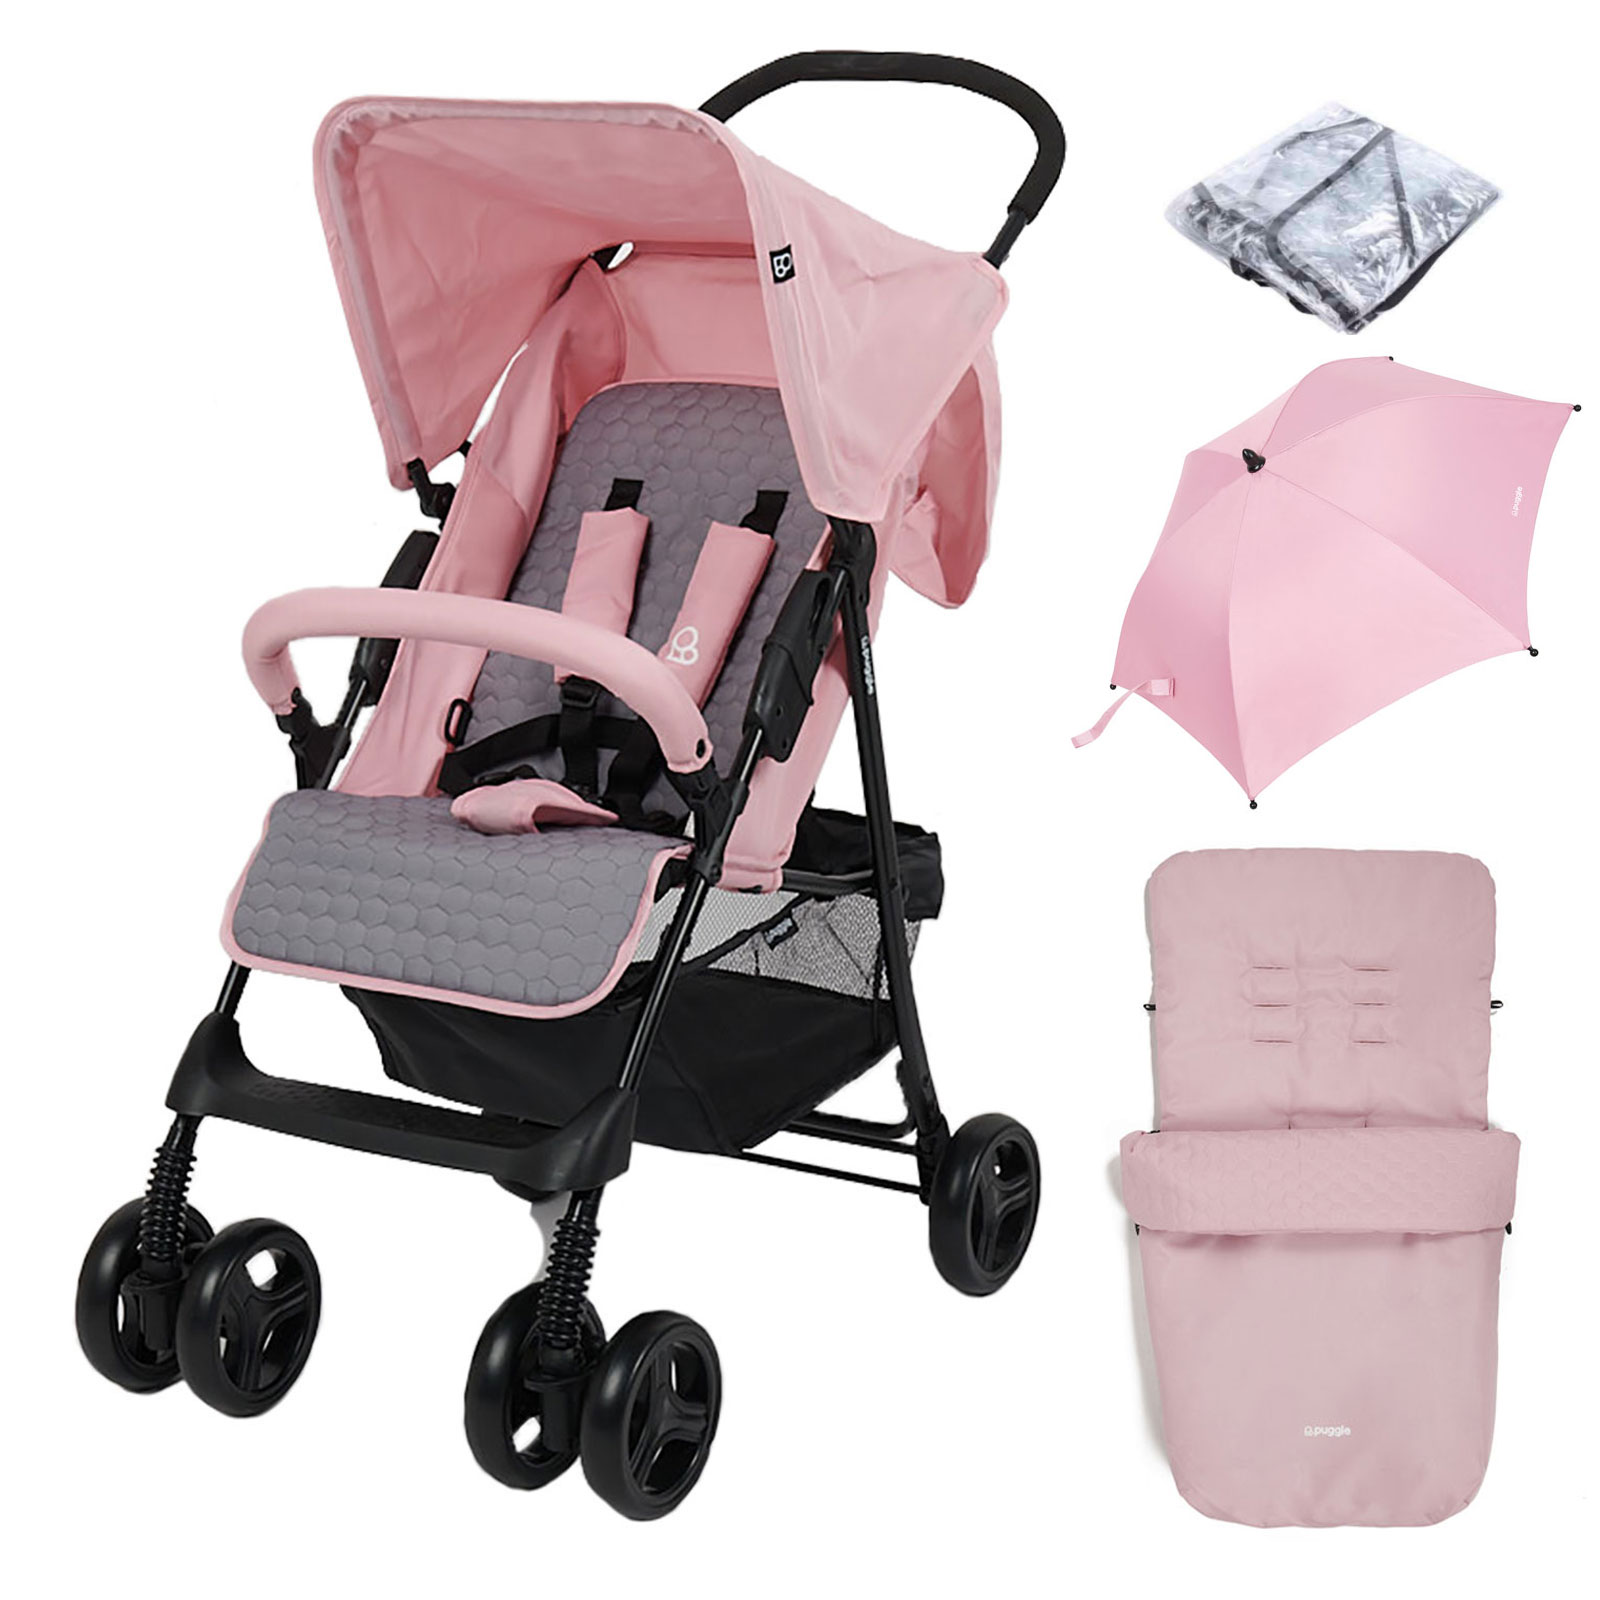 Puggle Holiday Luxe Pushchair Stroller with Raincover, Universal Footmuff and Parasol – Vintage Pink